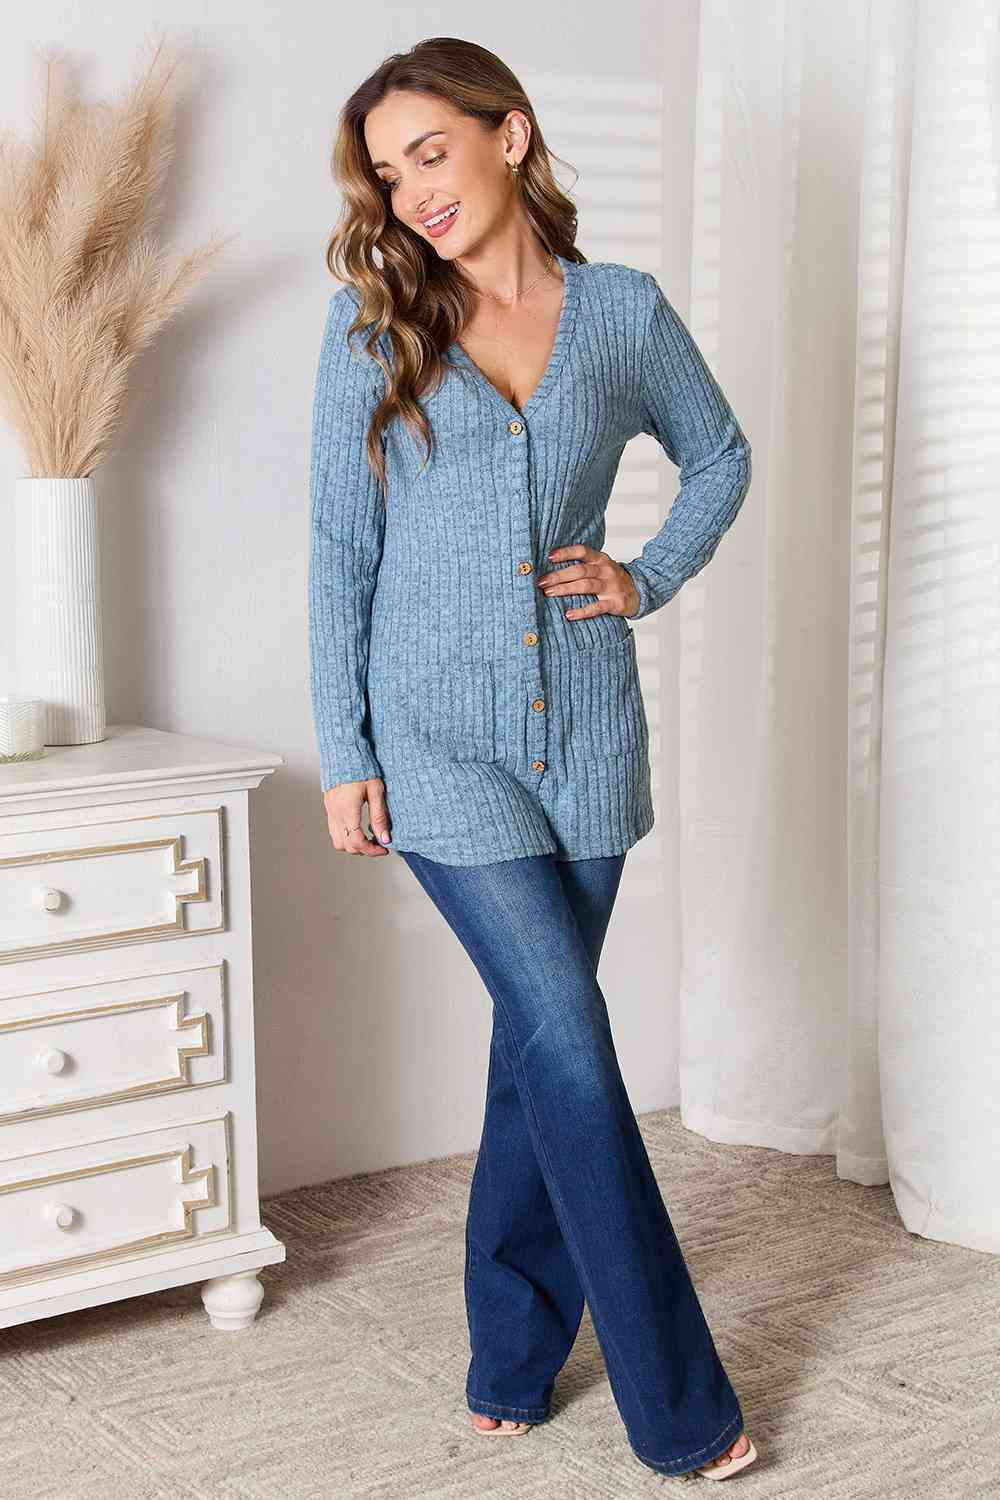 Ribbed Button-Up Cardigan with Pockets - Women’s Clothing & Accessories - Shirts & Tops - 13 - 2024